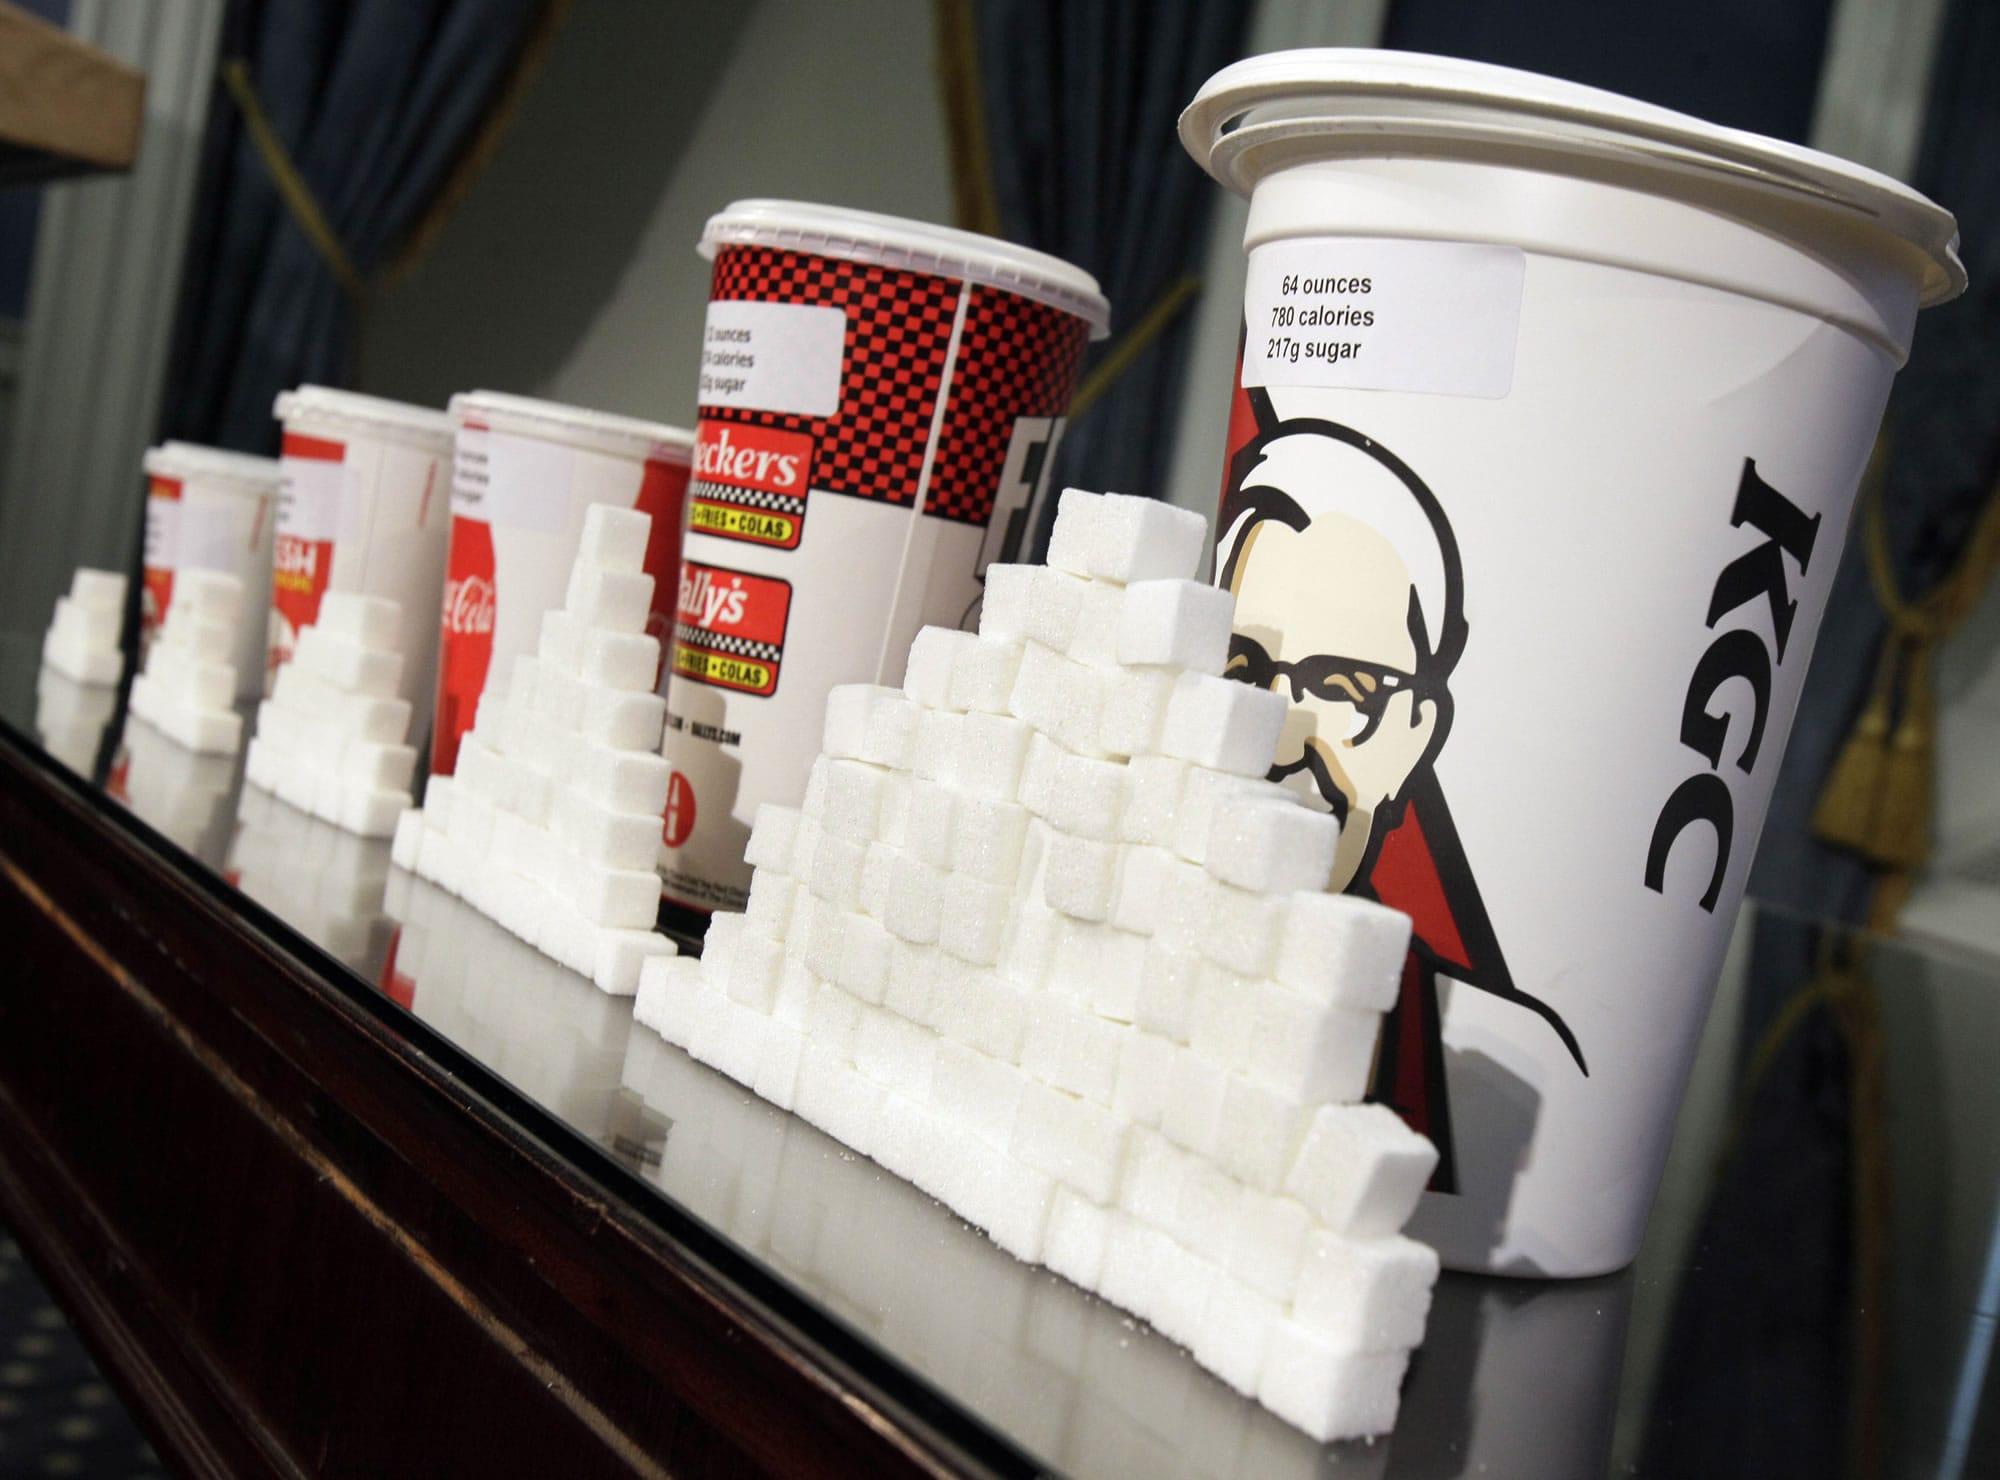 A judge struck down New York City's groundbreaking limit on the size of sugar-laden drinks Monday, March 11, 2013 shortly before it was set to take effect, agreeing with the beverage industry and other opponents that the rule is arbitrary in applying to only some sweet beverages and some places that sell them.